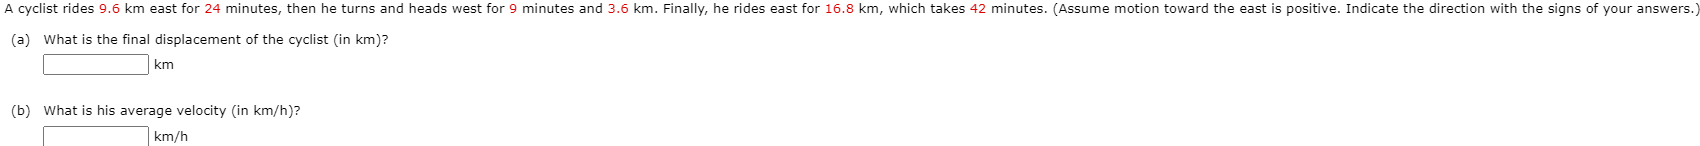 A cyclist rides 9.6 km east for 24 minutes, then he turns and heads west for 9 minutes and 3.6 km. Finally, he rides east for 16.8 km, which takes 42 minutes. (Assume motion toward the east is positive. Indicate the direction with the signs of your answers.
(a) What is the final displacement of the cyclist (in km)?
km
(b) What is his average velocity (in km/h)?
km/h
